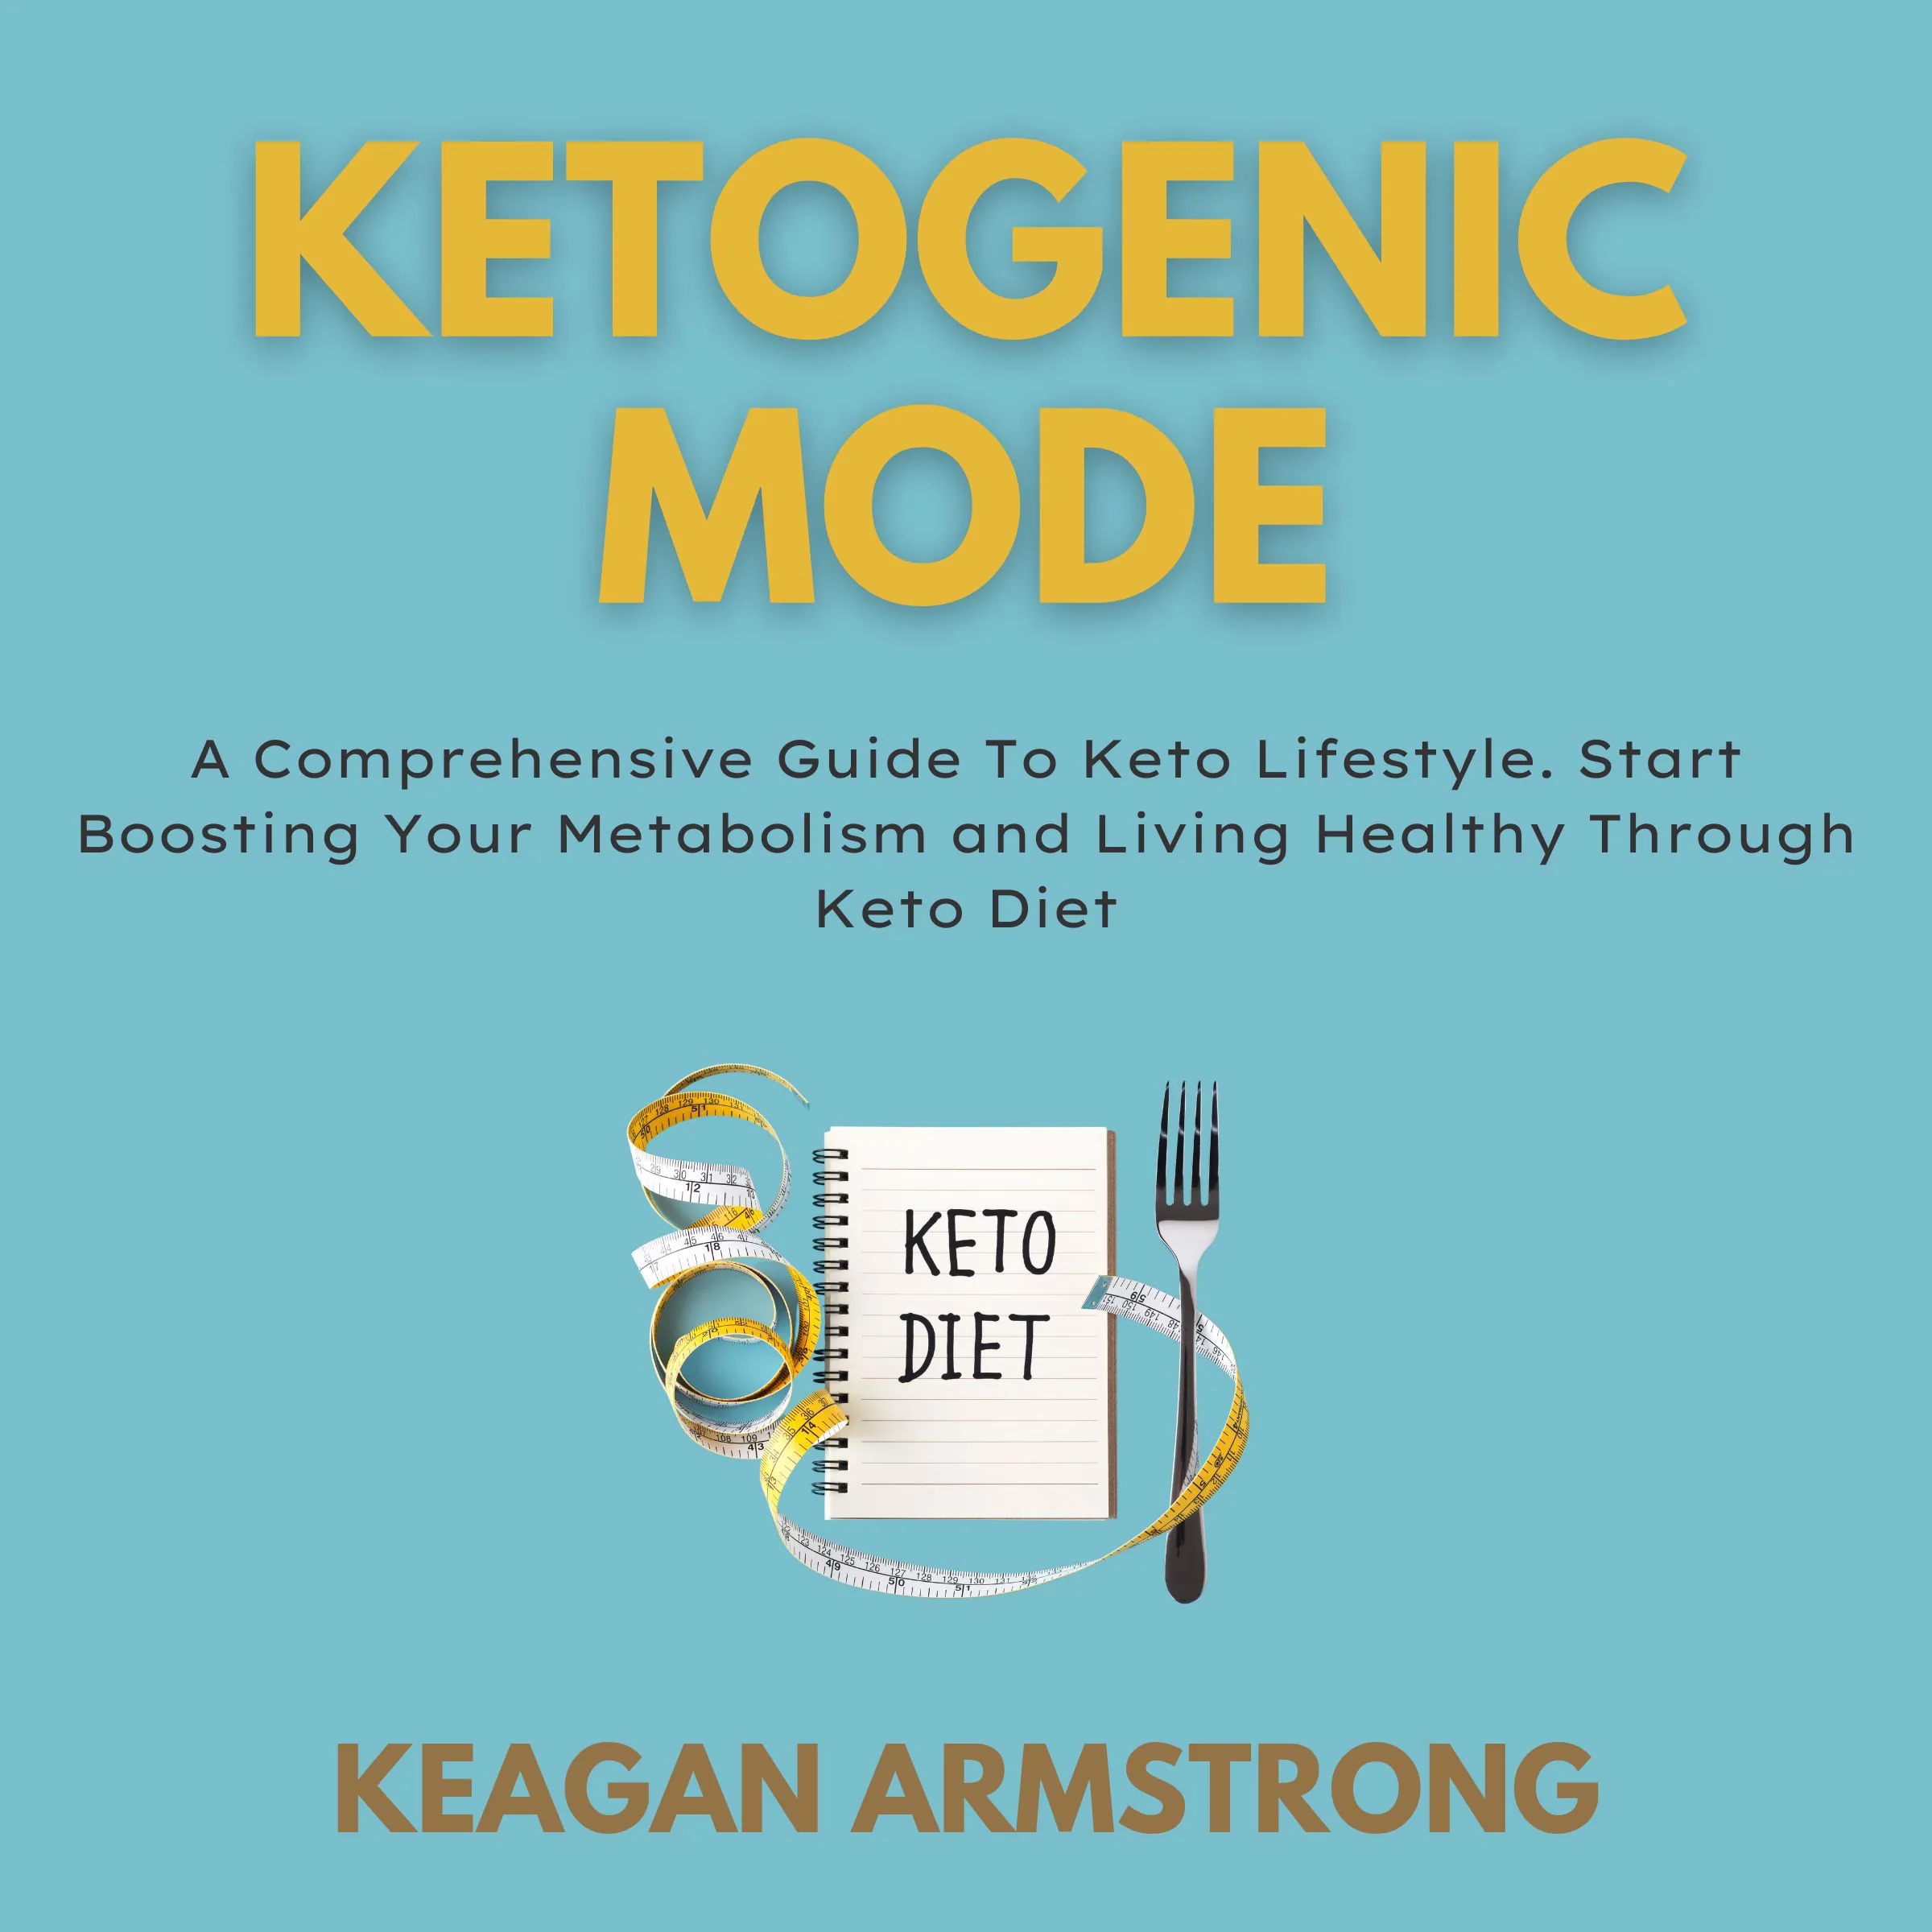 Ketogenic Mode Audiobook by Keagan Armstrong